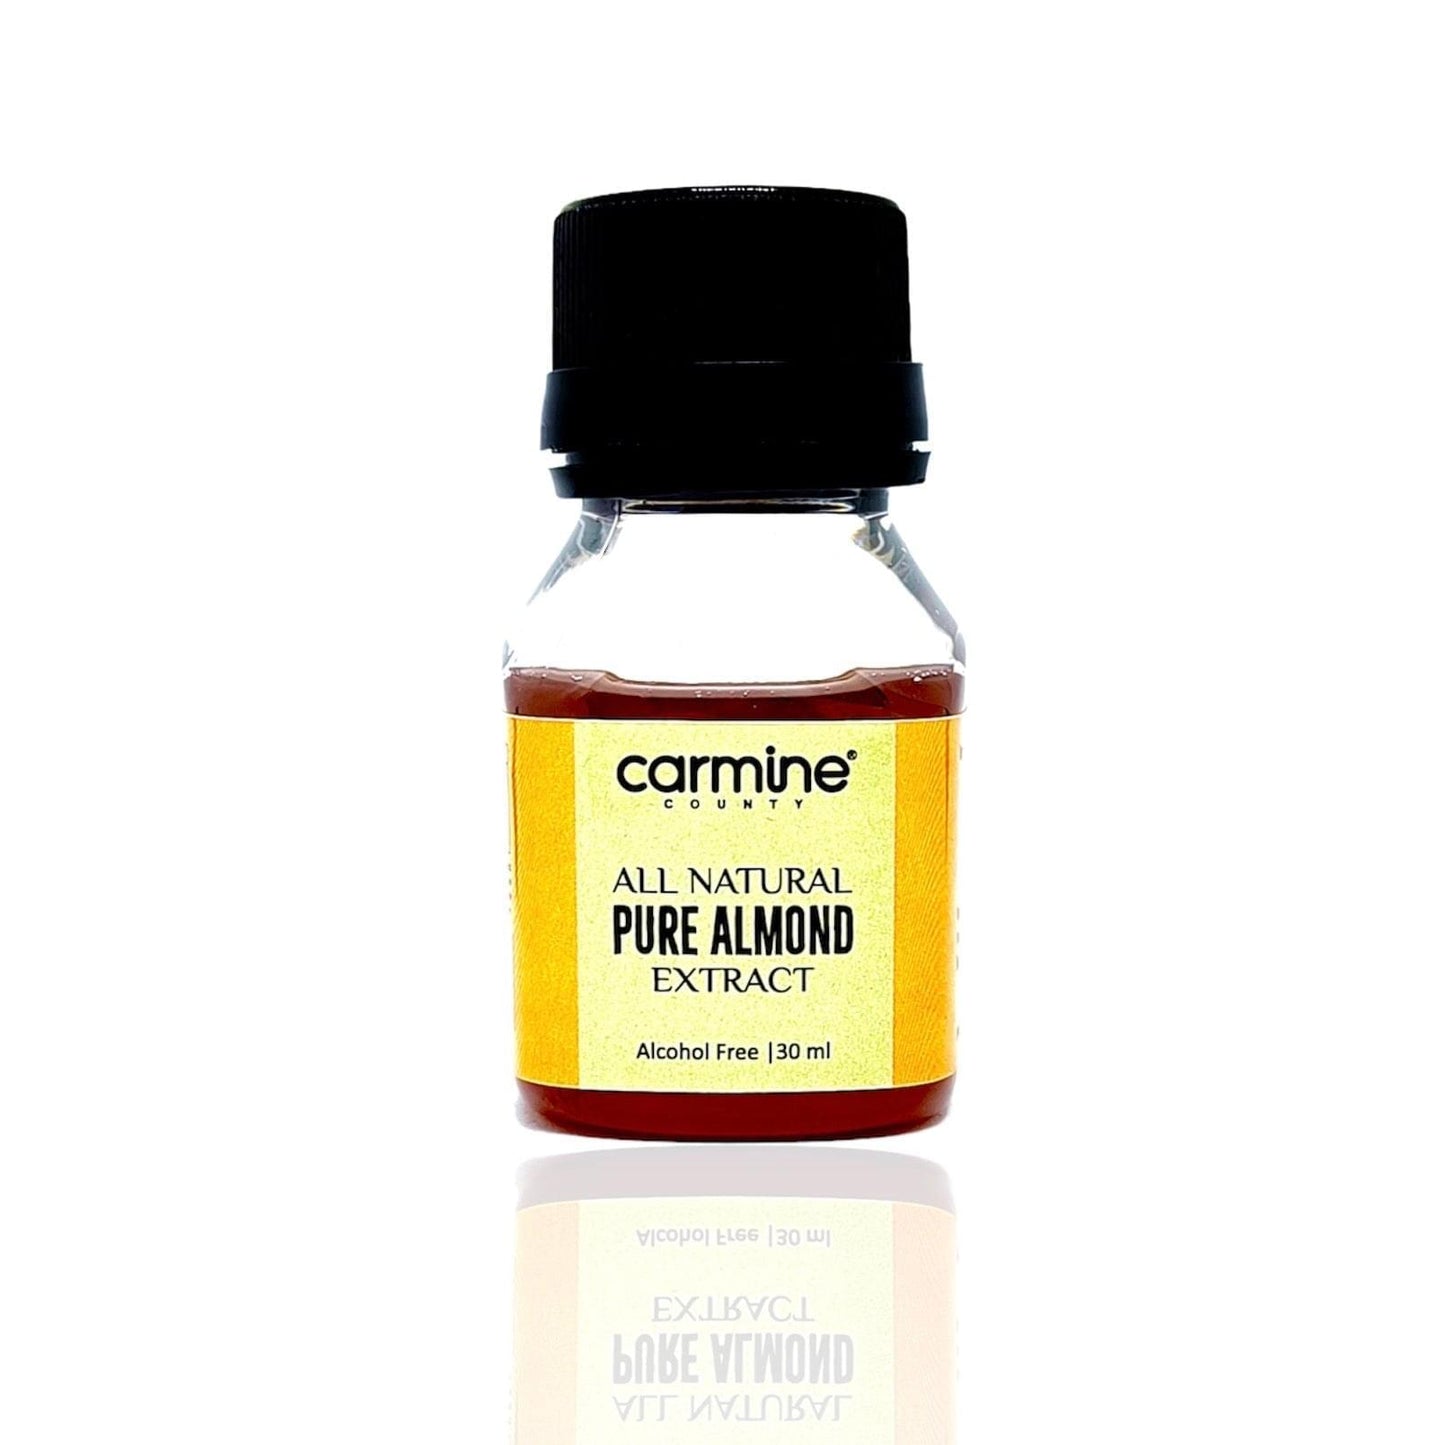 Carmine County All Natural Pure Almond Extract